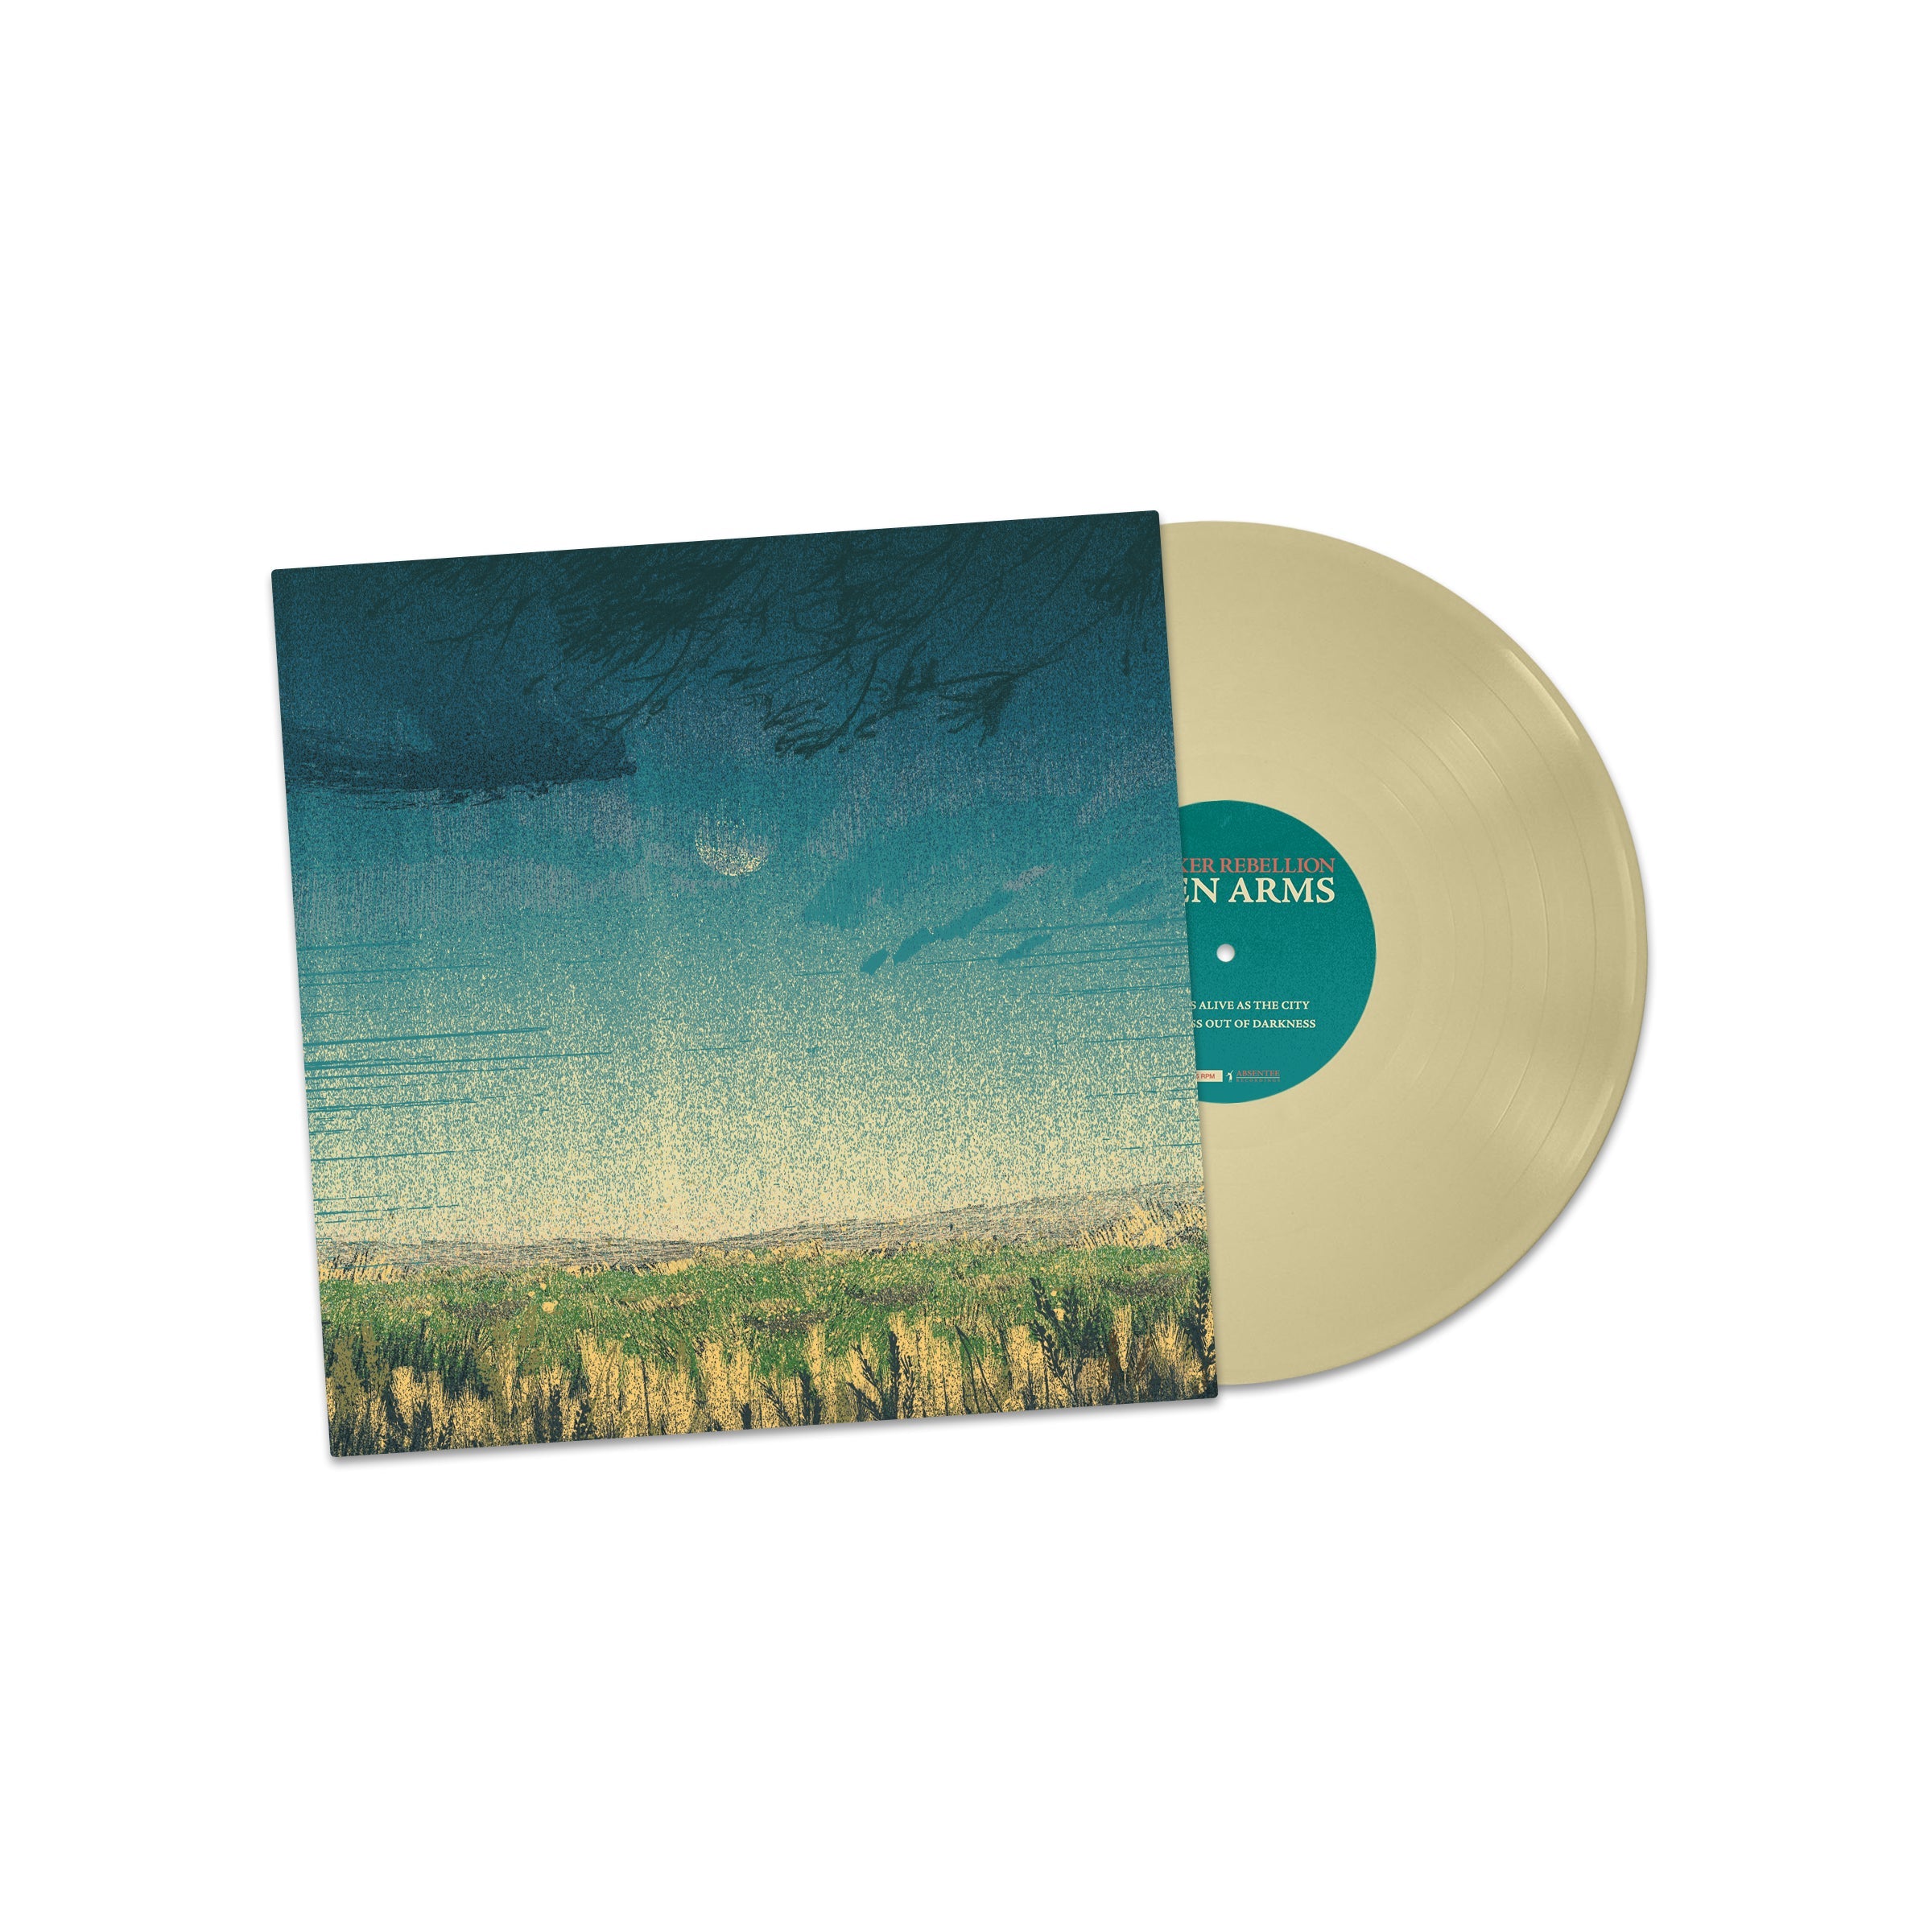 Open Arms: Limited Cream Vinyl EP & Exclusive Signed Print